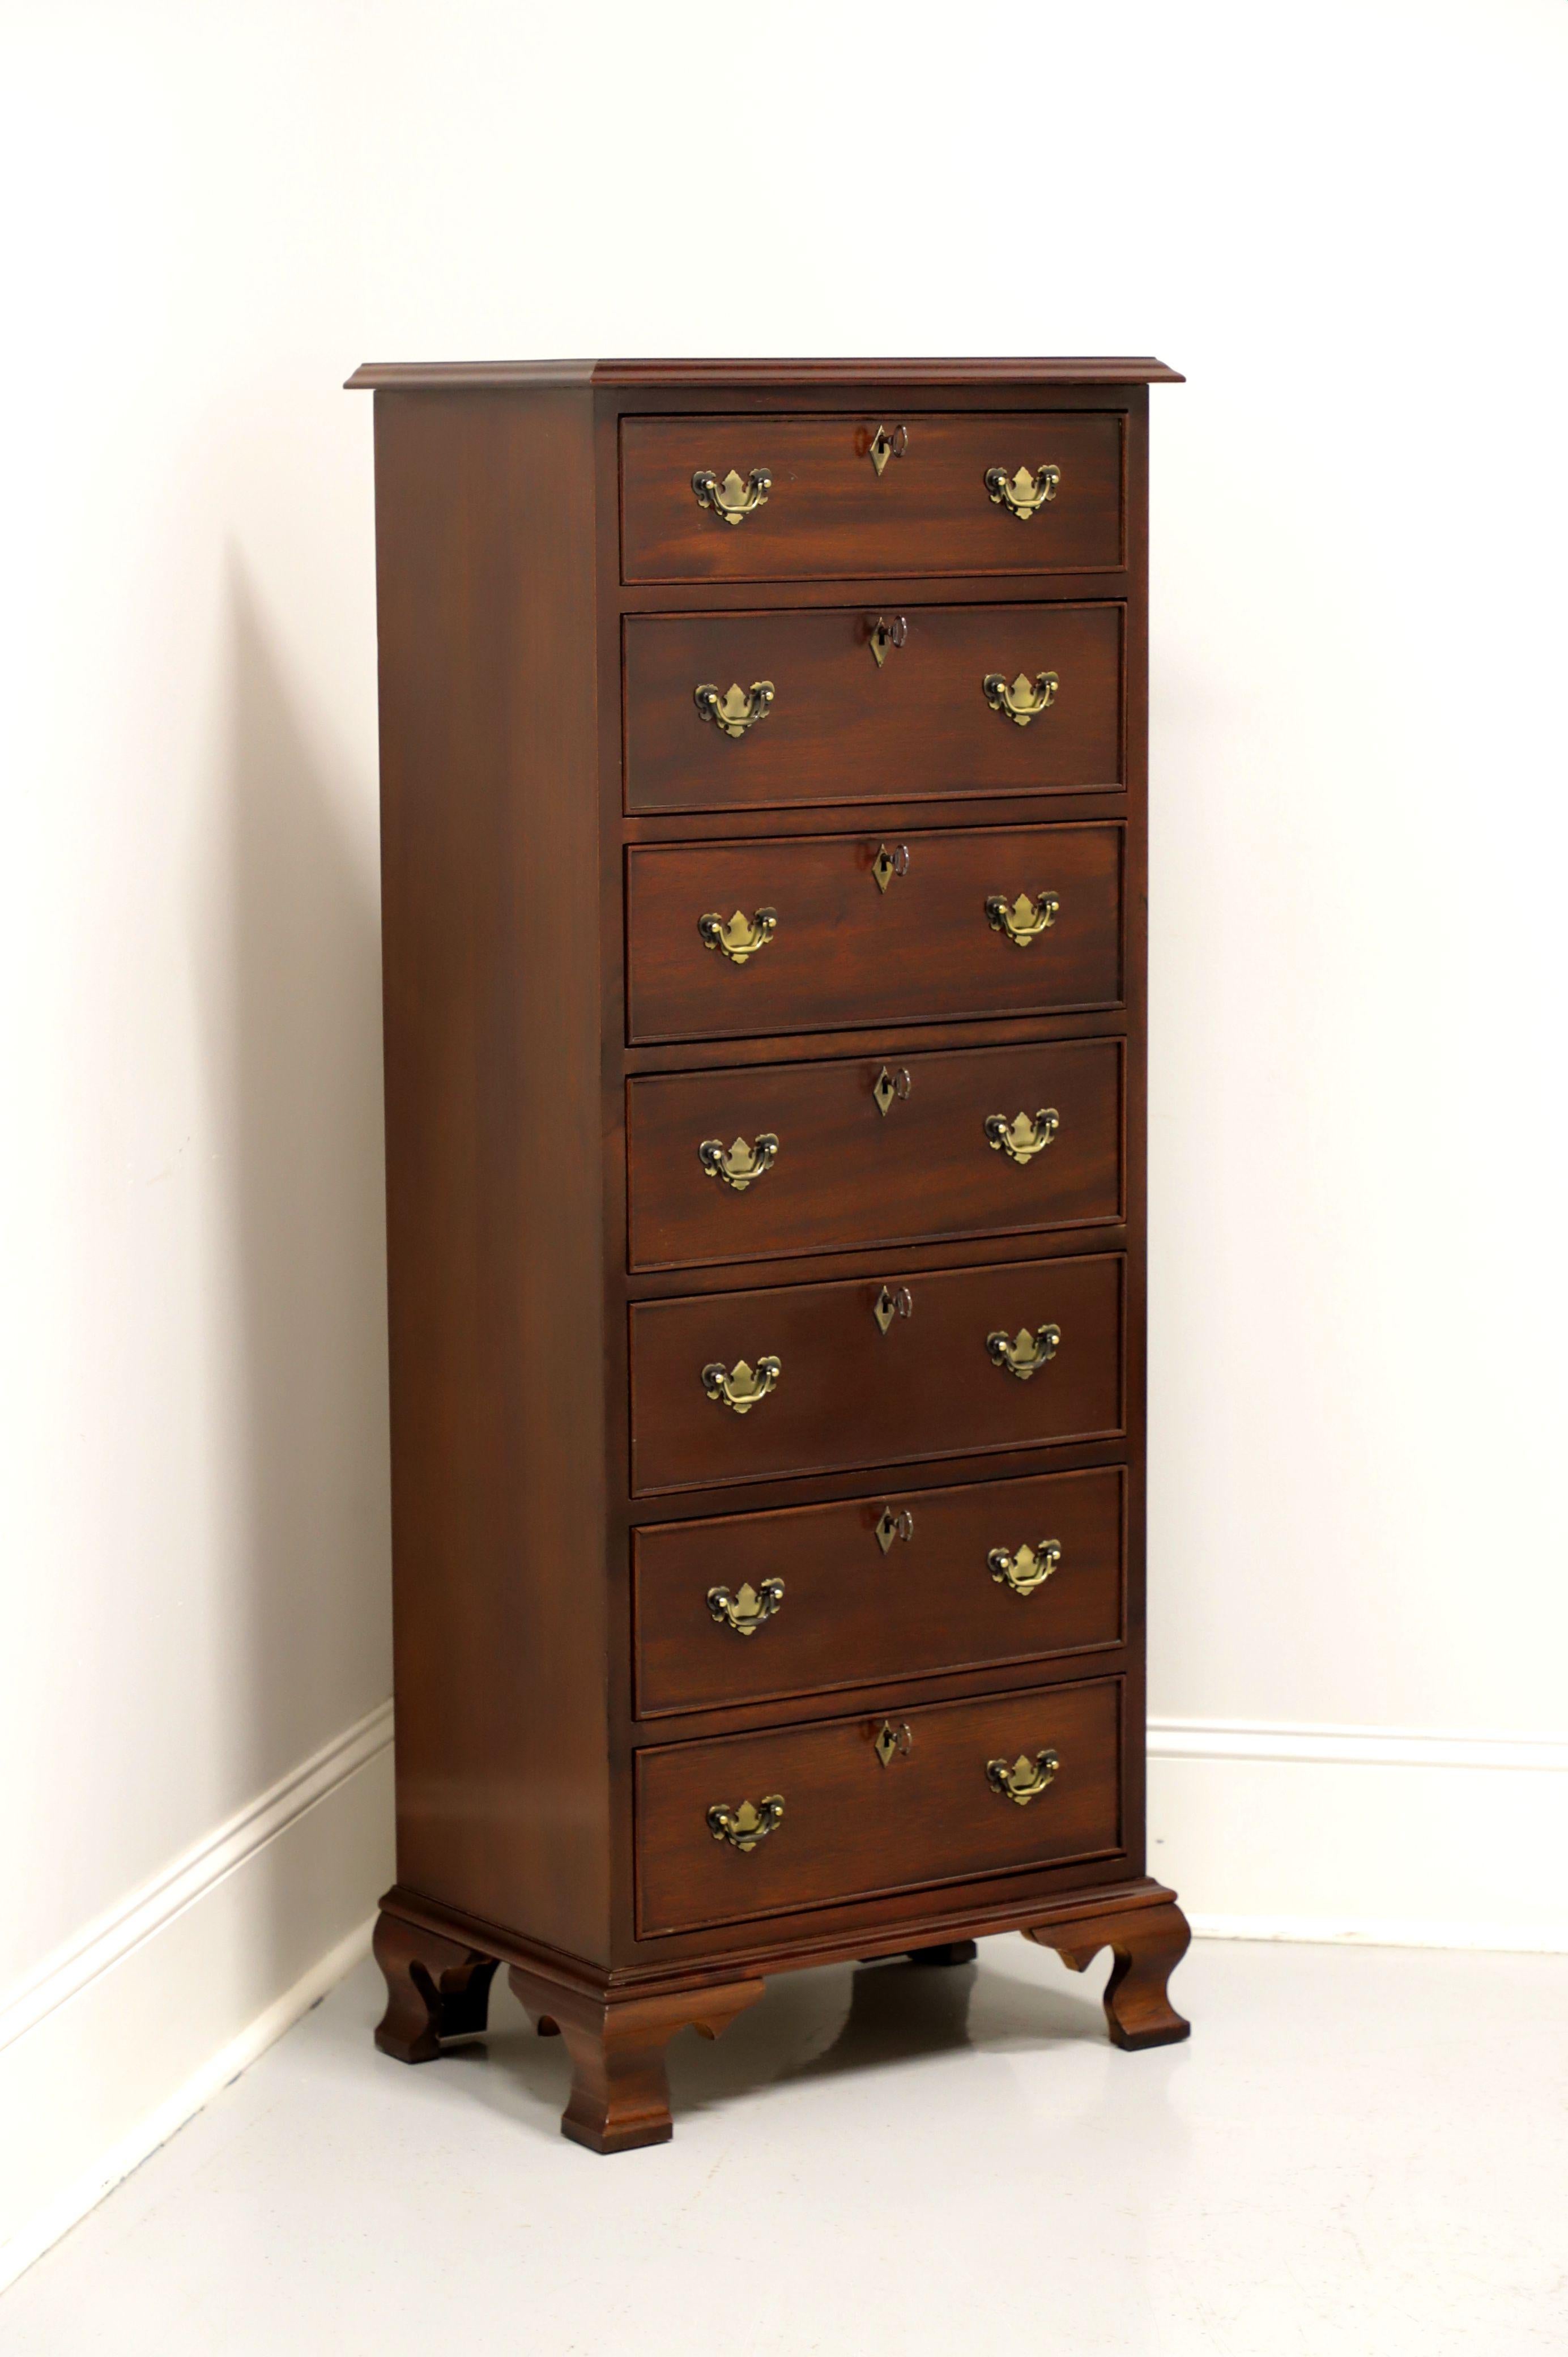 CRAFTIQUE Solid Mahogany Chippendale Style Semainier Lingerie Chest w/ Ogee Feet 7